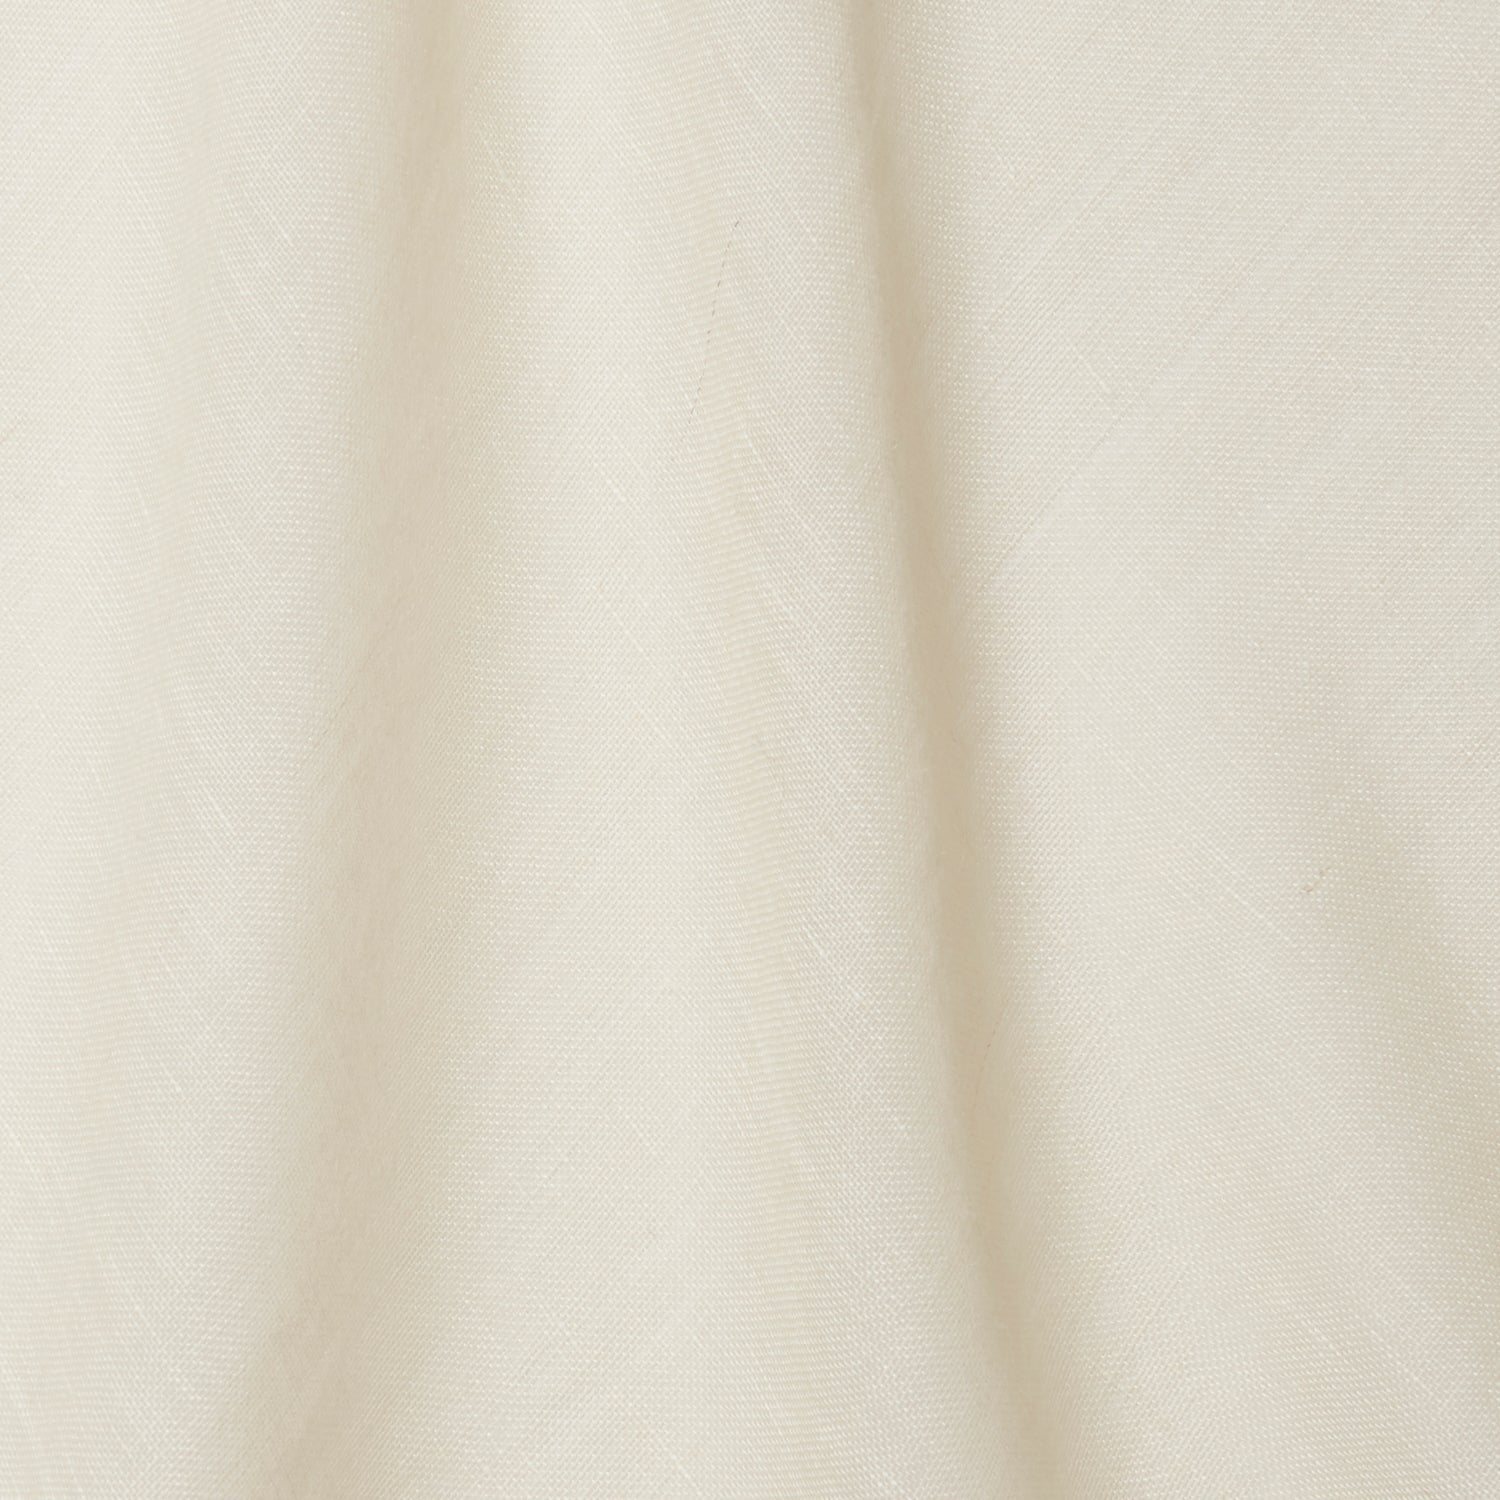 A draped swatch of open-weave sheer interior fabric in a mottled cream color.